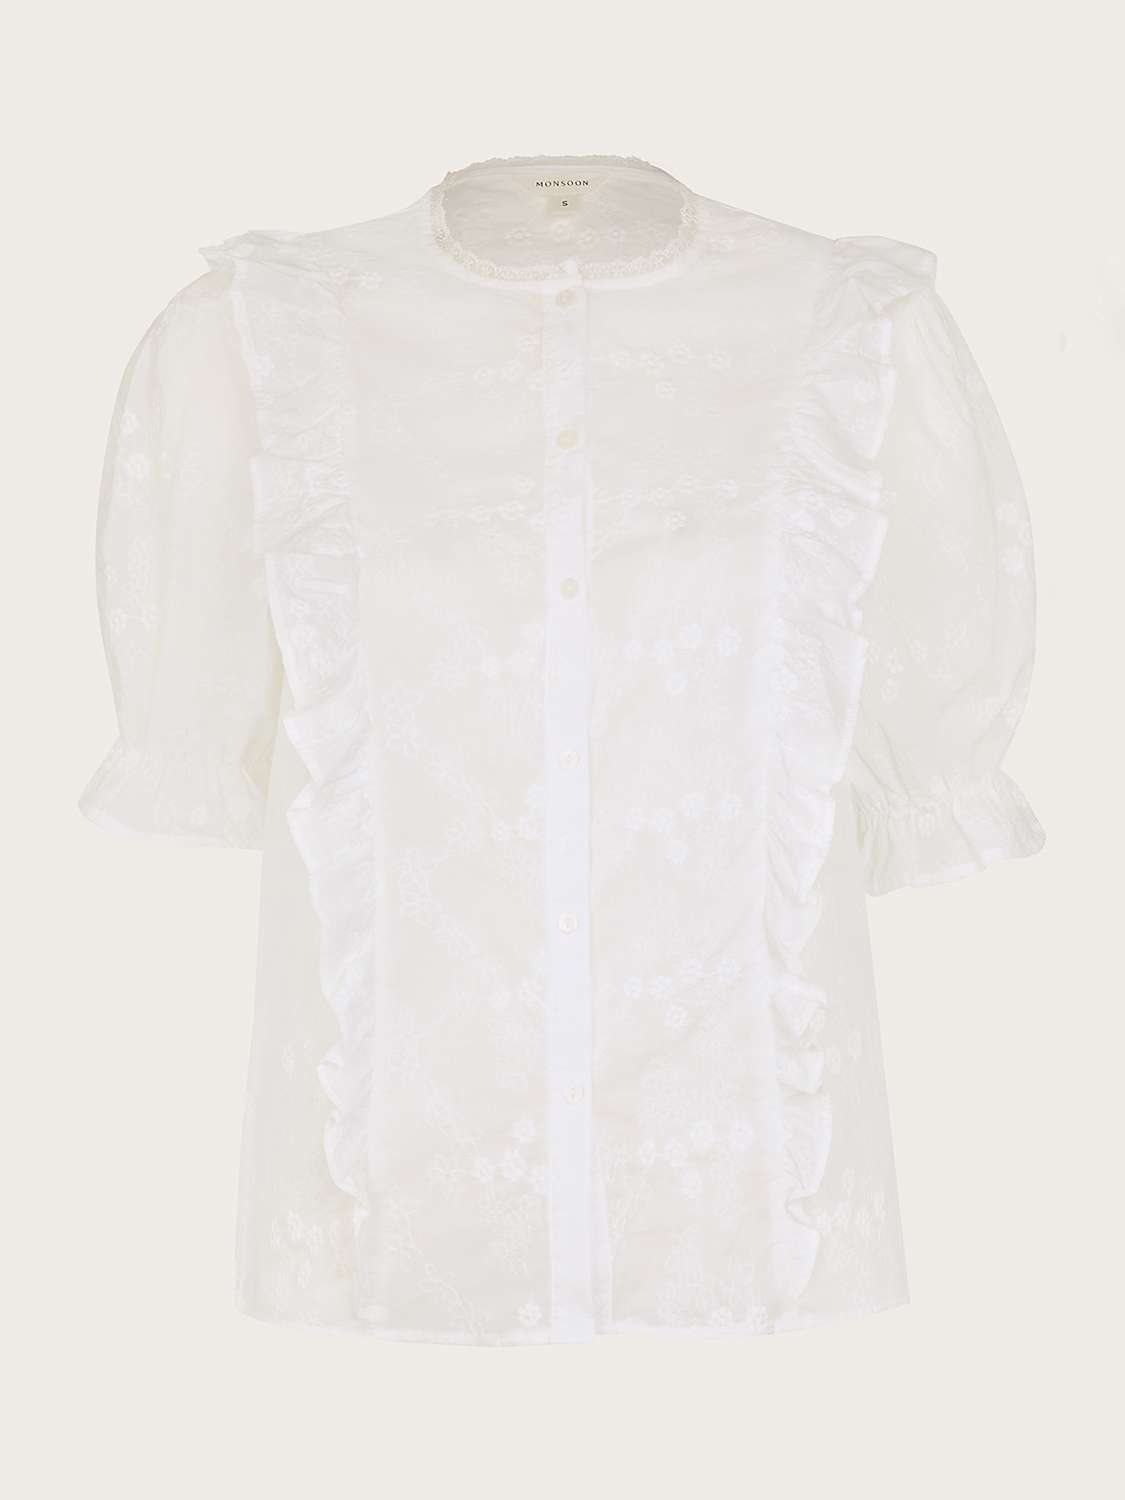 Buy Monsoon Iris Embroidered Blouse, White Online at johnlewis.com